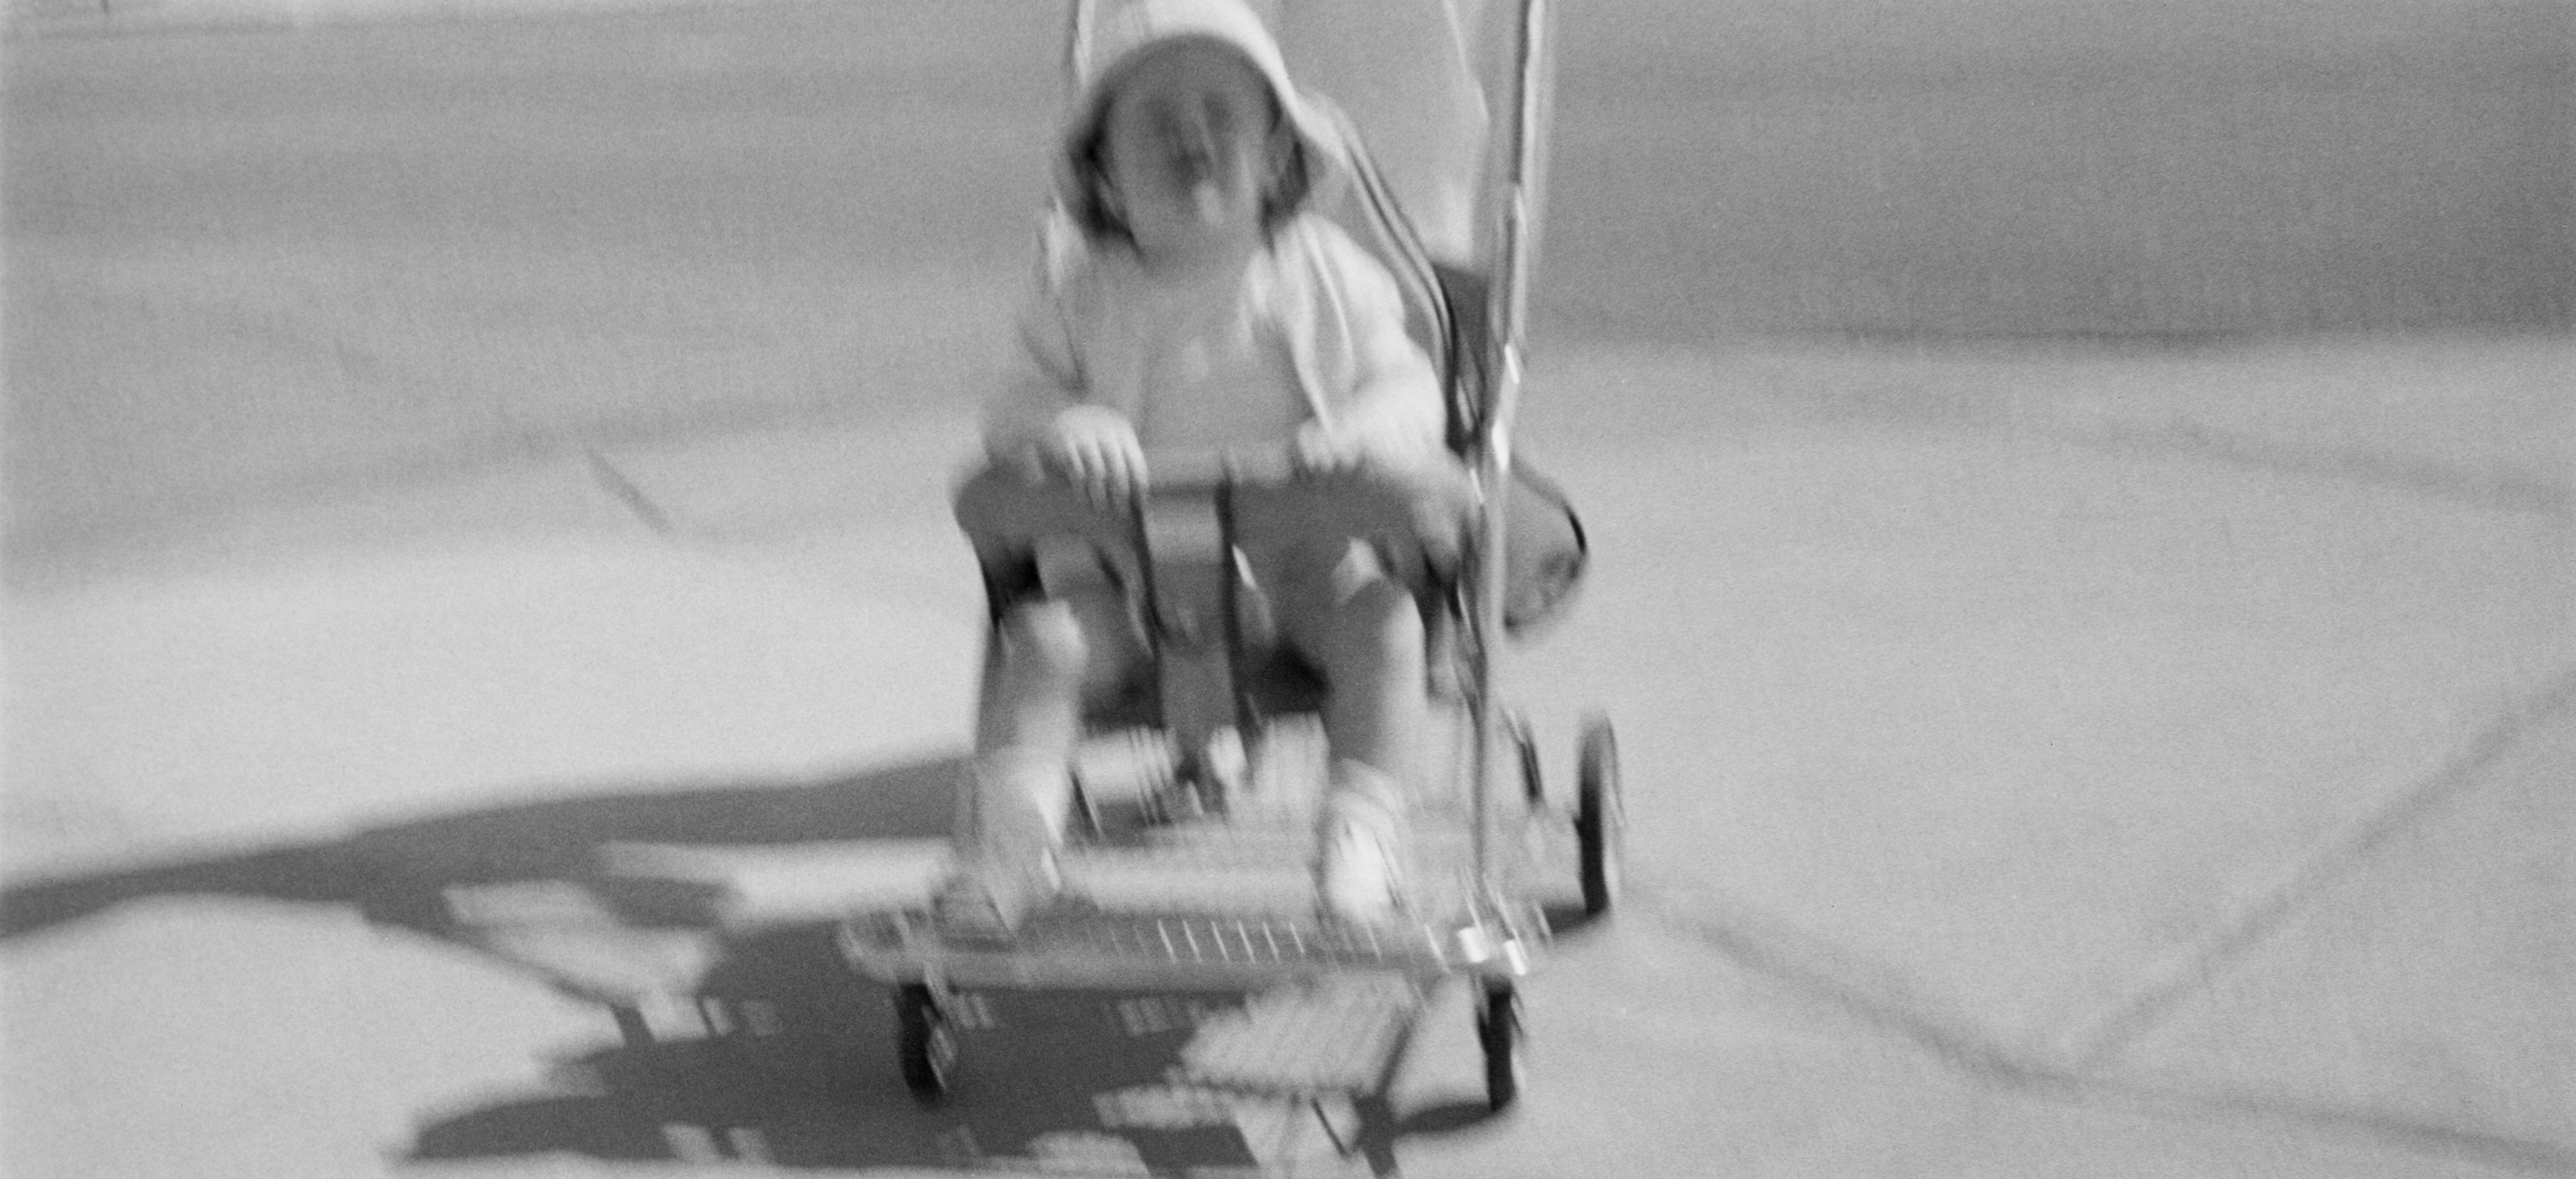 Black and white photograph of a child seated in a stroller on a sidewalk